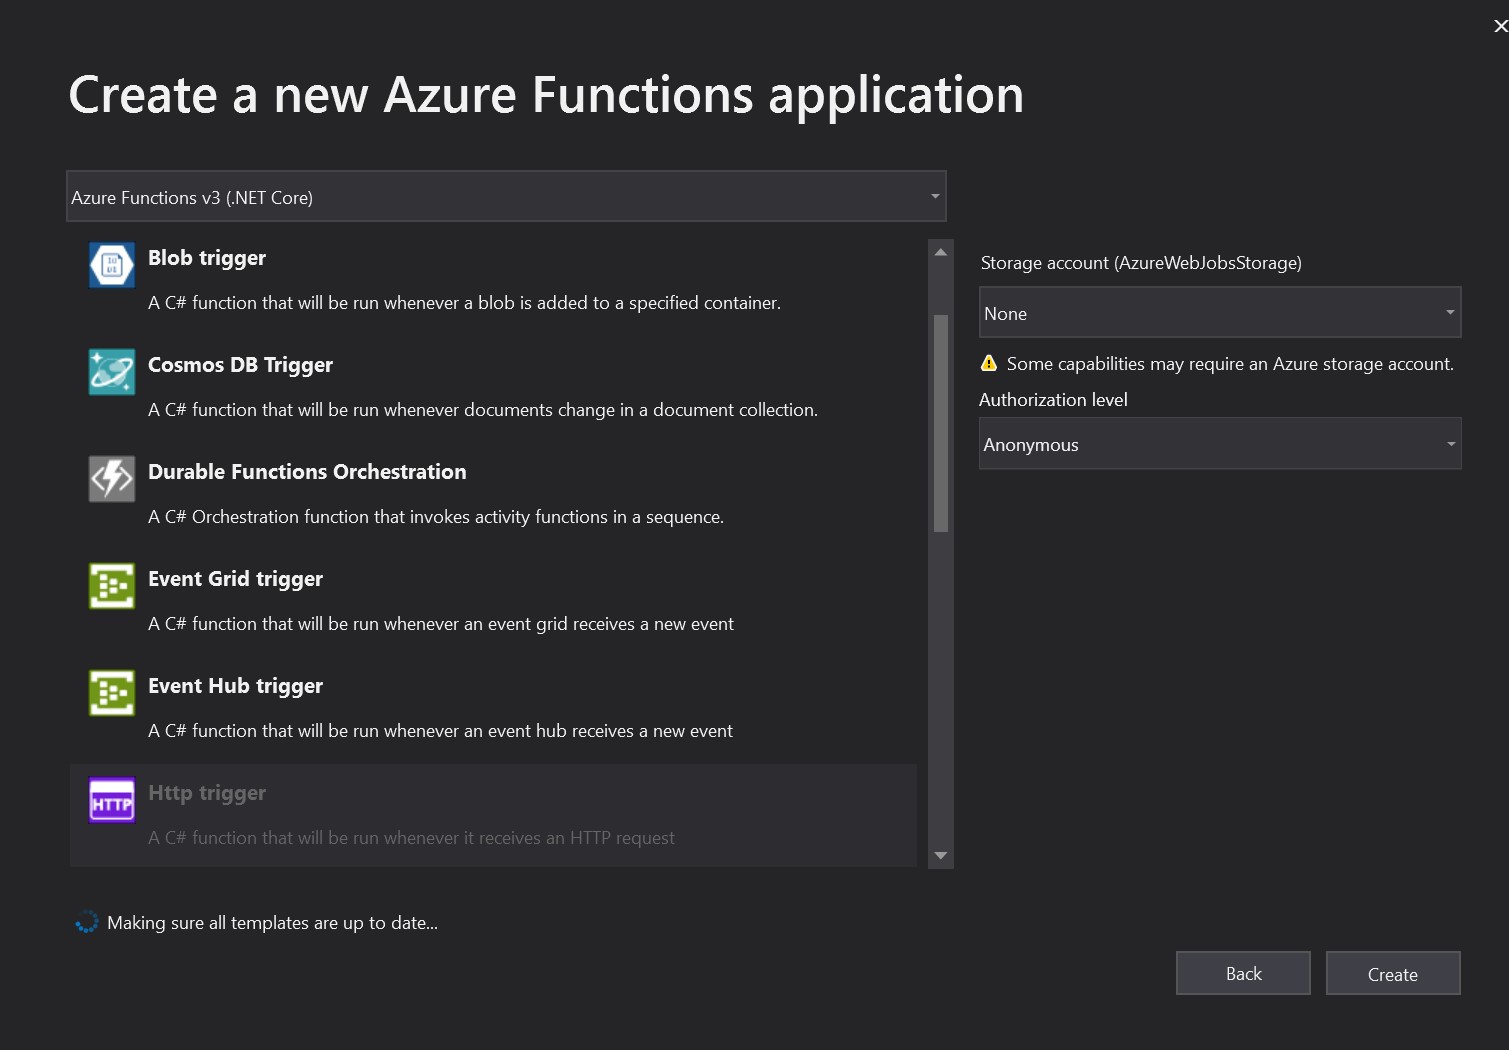 A screenshot showing the options I selected for my new Azure Function project